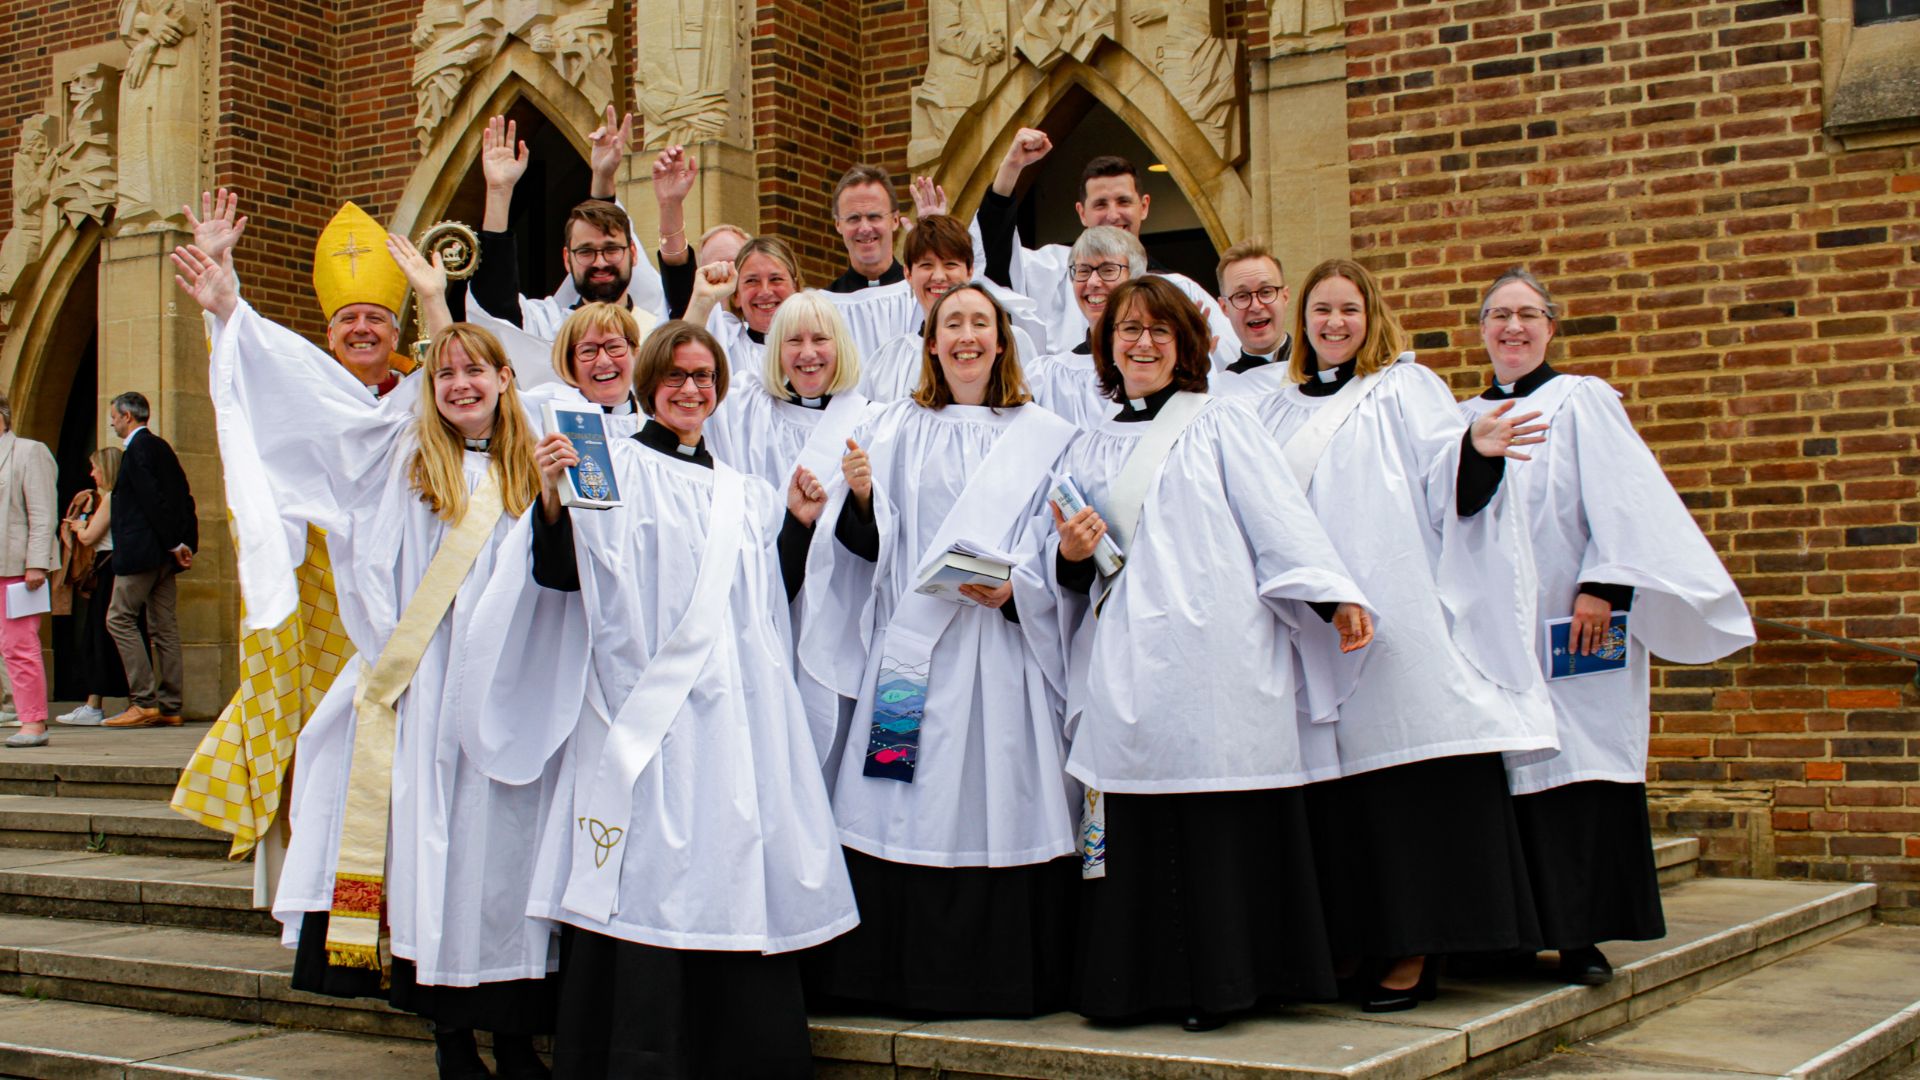 Deacons in full clerical attire celebrate their ordination with Bishop Andrew